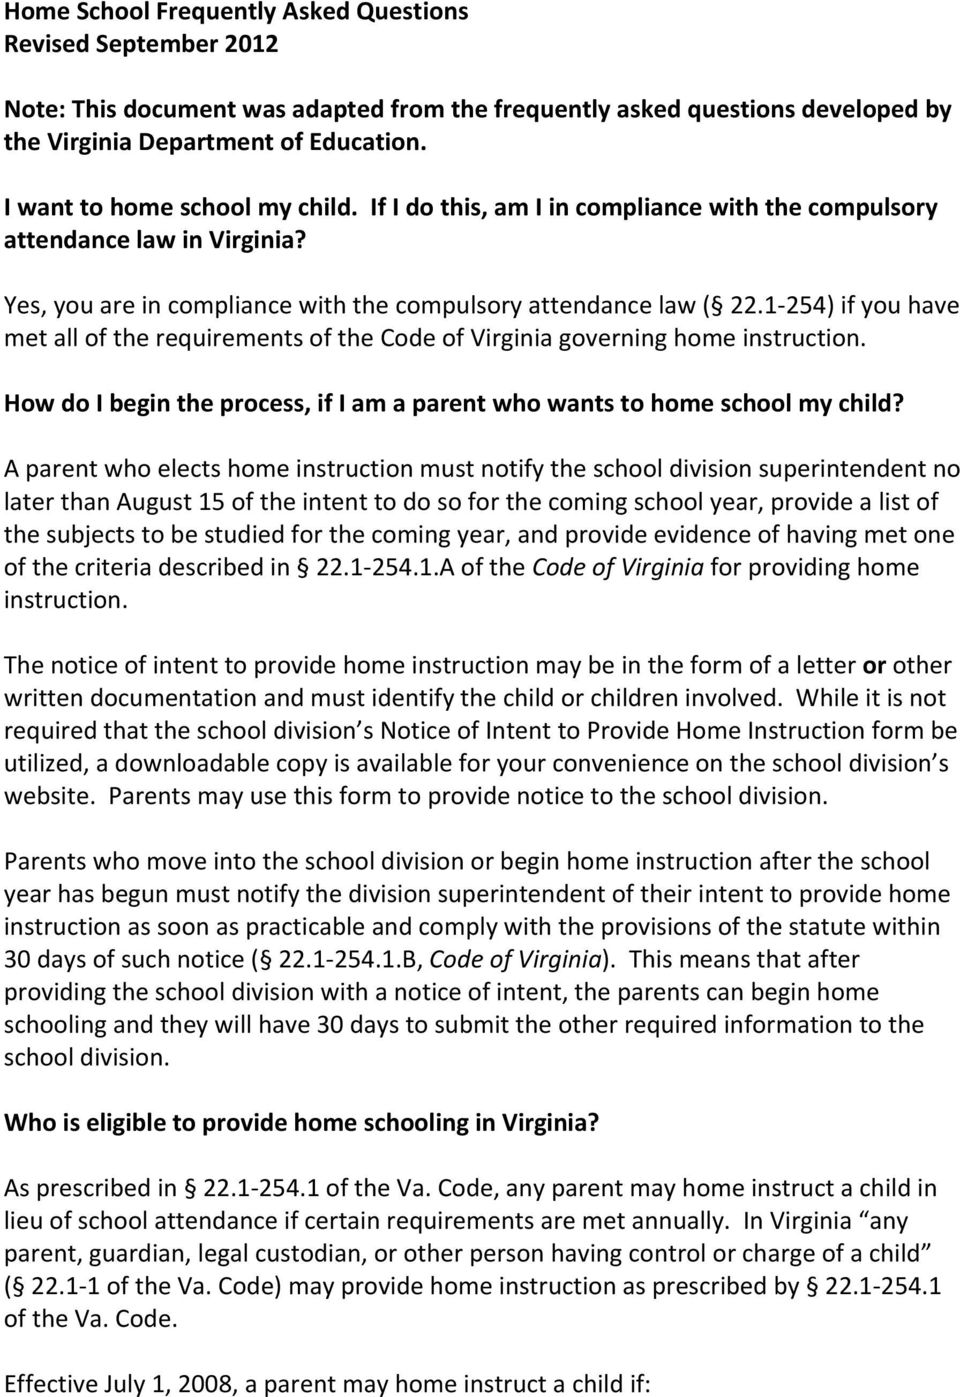 1-254) if you have met all of the requirements of the Code of Virginia governing home instruction. How do I begin the process, if I am a parent who wants to home school my child?